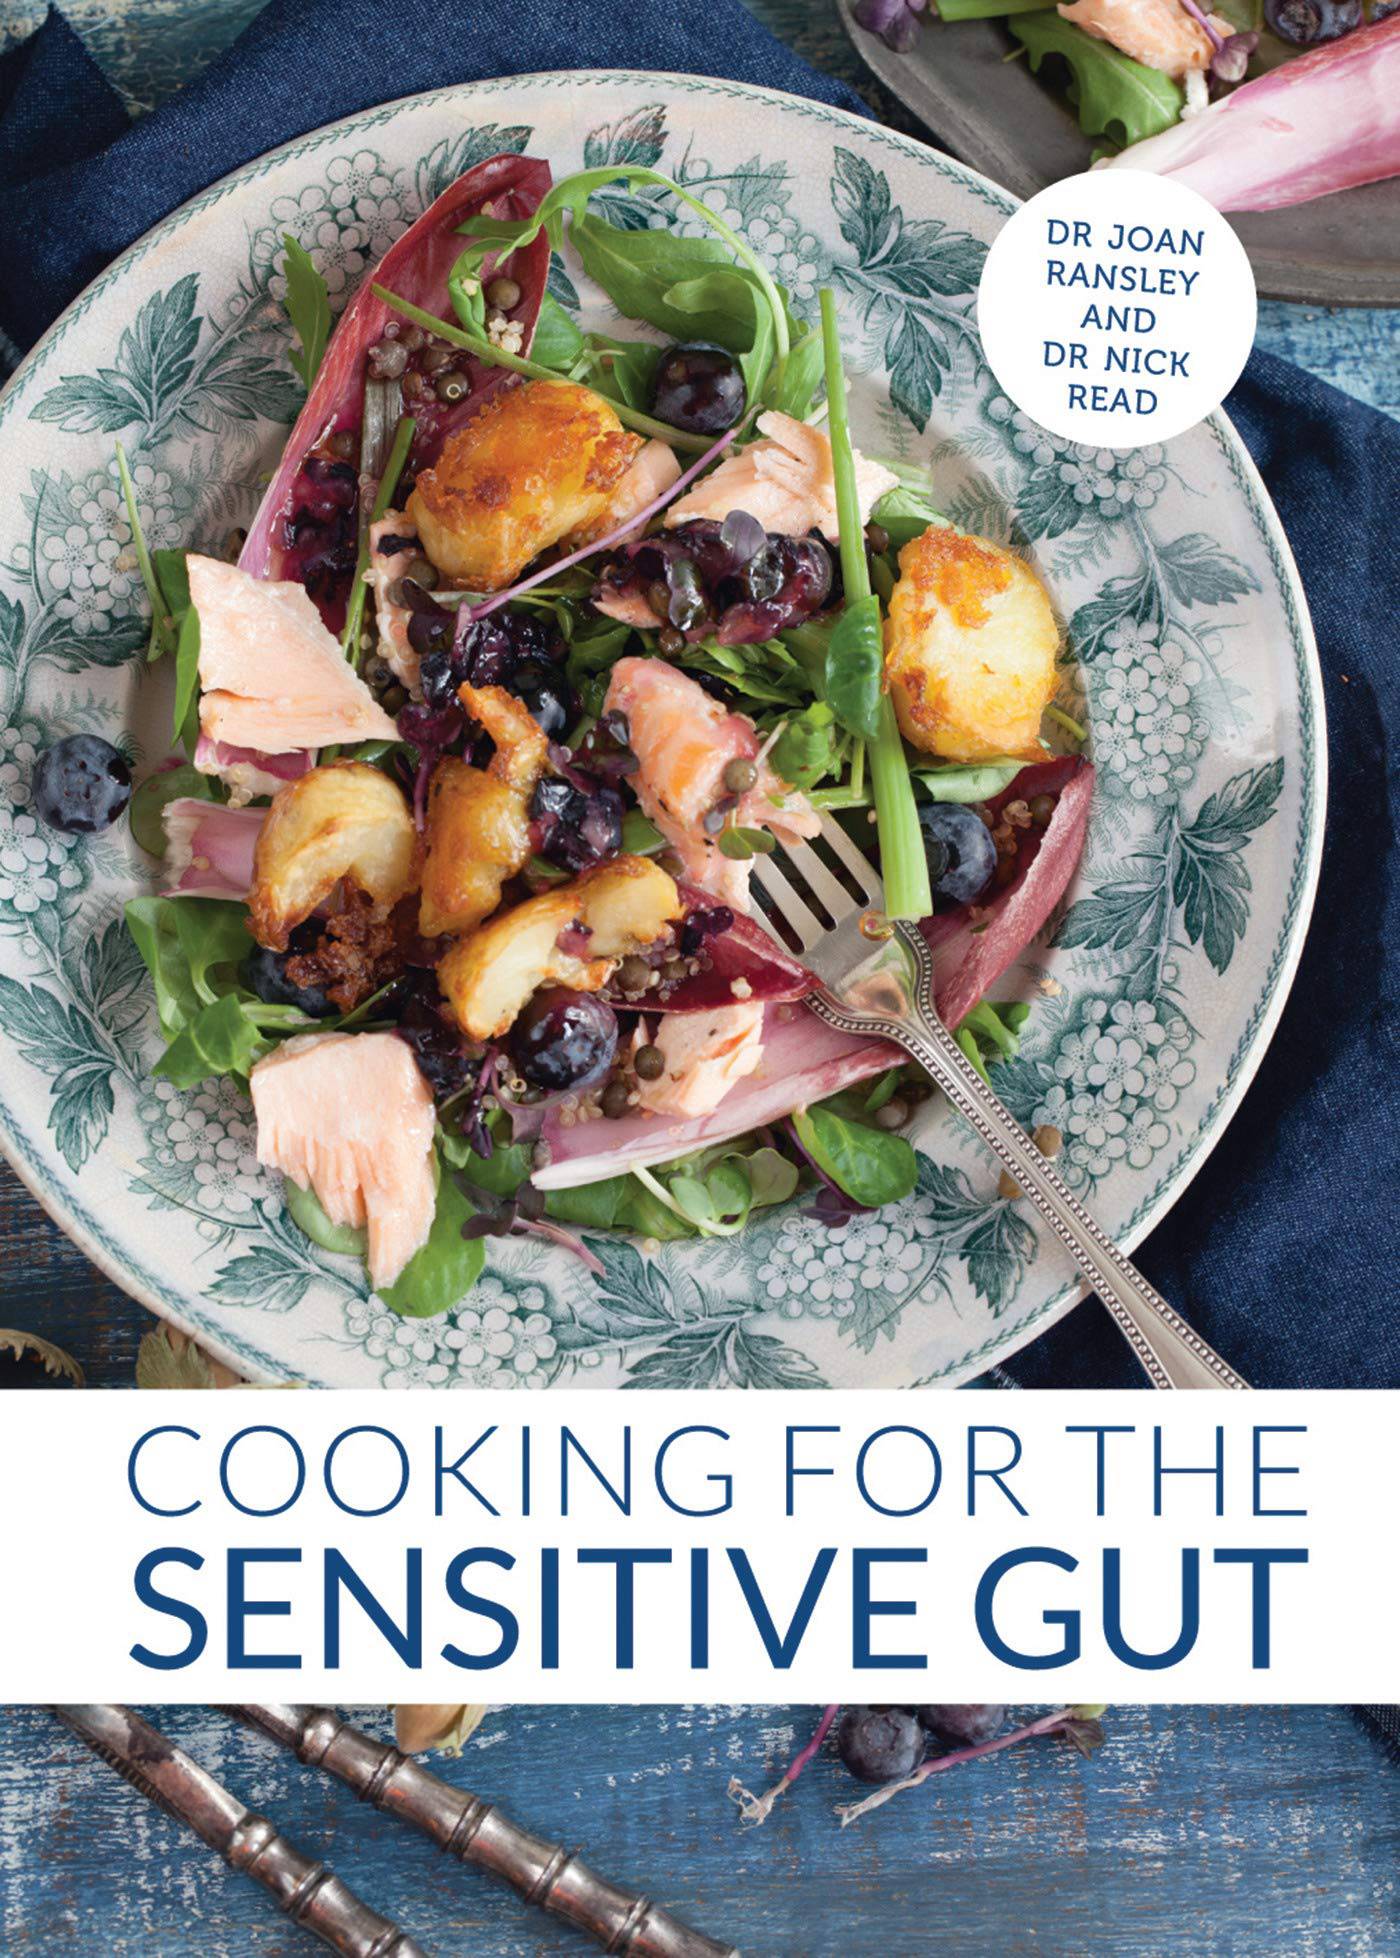 Cooking for the sensitive gut by Dr. Joan Ransley and Dr. Nick Read